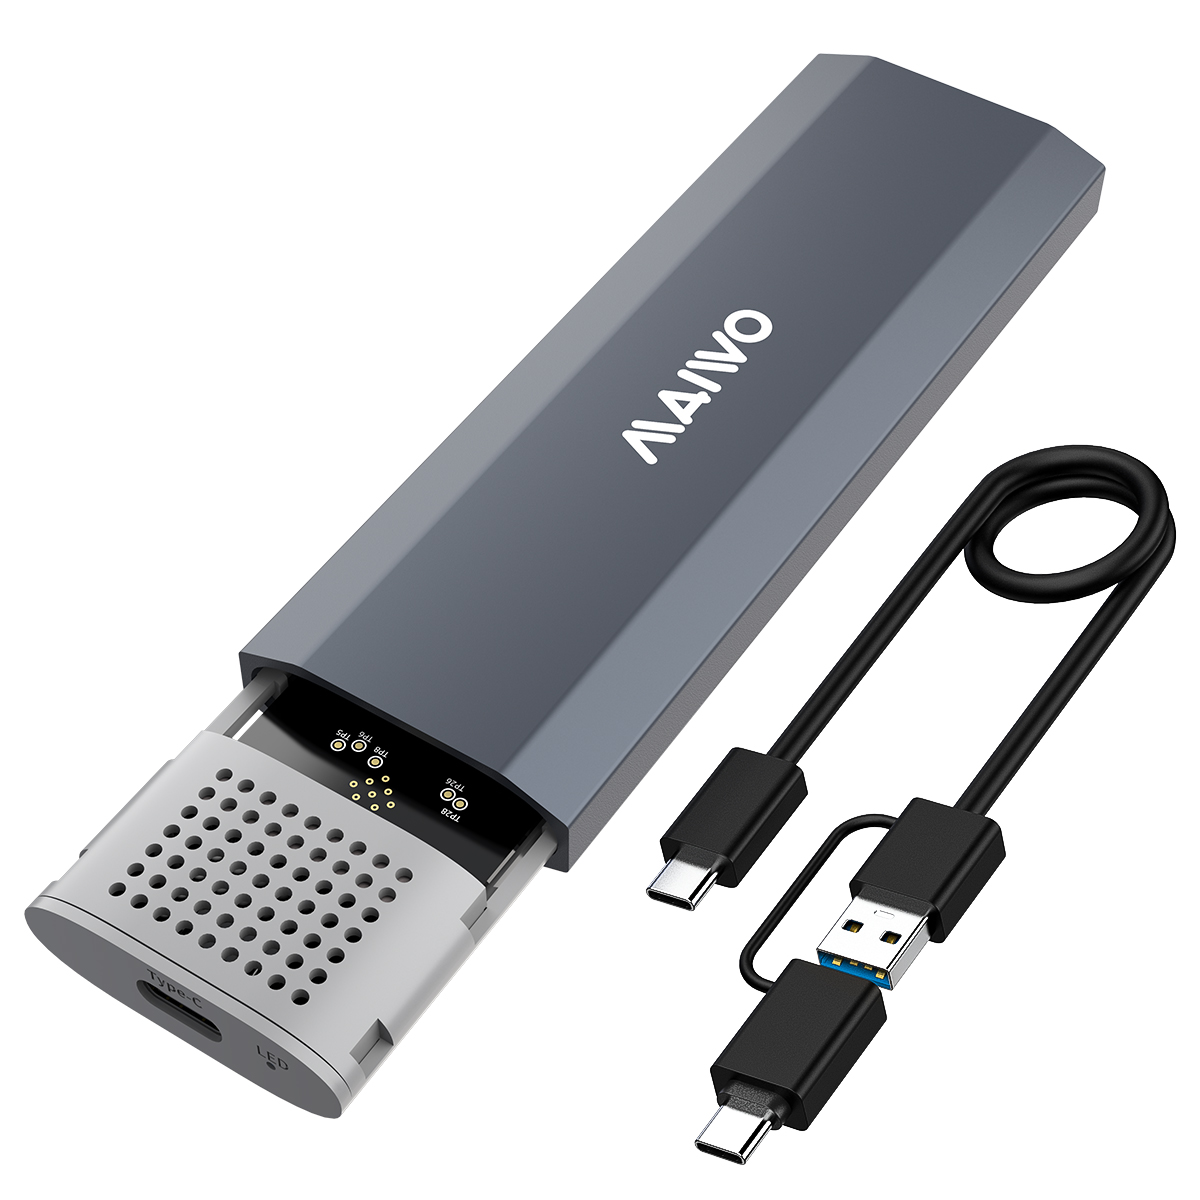 MAIWO K1690P M.2 SSD Enclosure Adapter,USB 3.2 Gen 2 (10Gbps) to M.2 NVME,Support UASP Trim, 2TB Sto